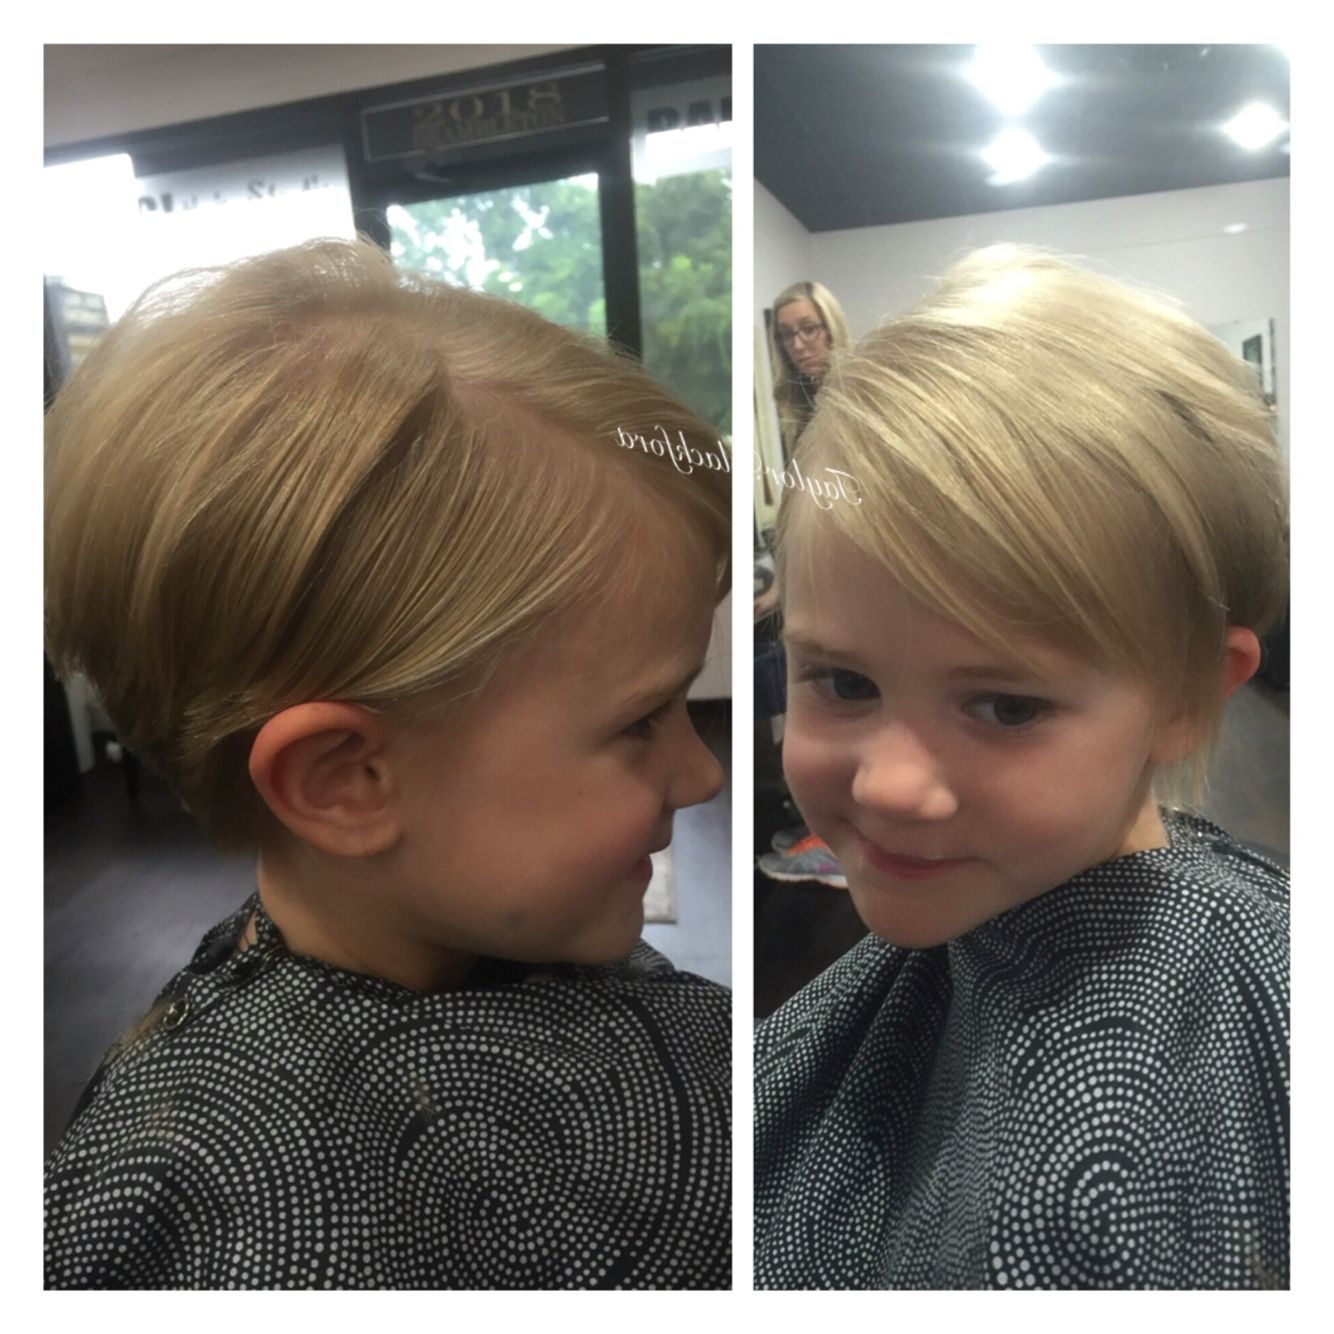 Precious Pixie Cut On This Little Girl! Perfect Haircut For Fine Pertaining To Most Current Long Pixie Hairstyles For Fine Hair (View 8 of 15)